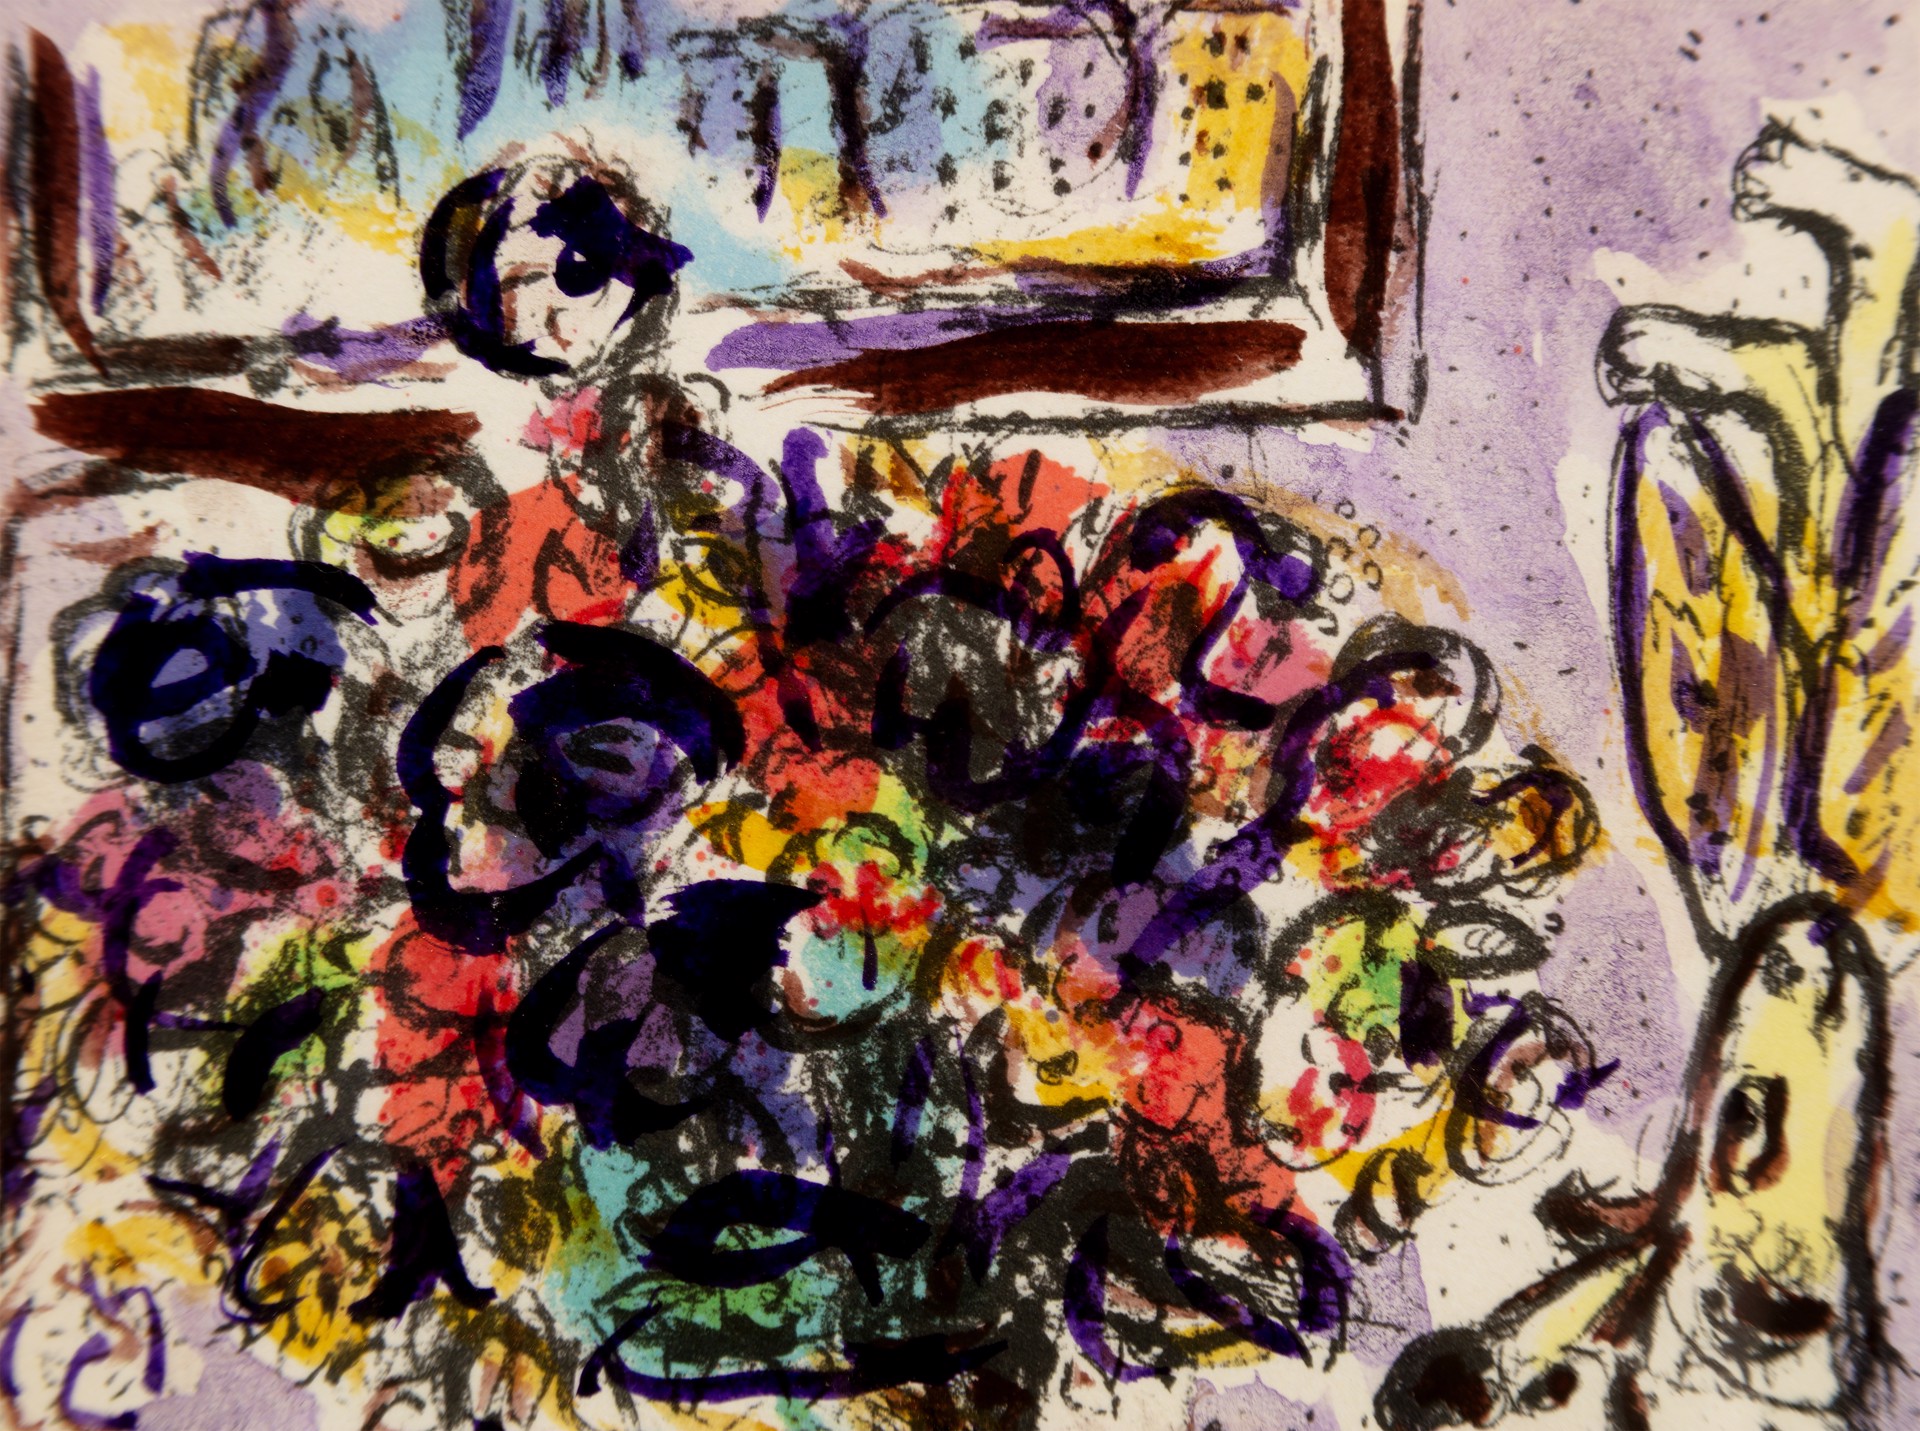 Homage to Marc Chagall: The Anemones, M730 by David Barnett